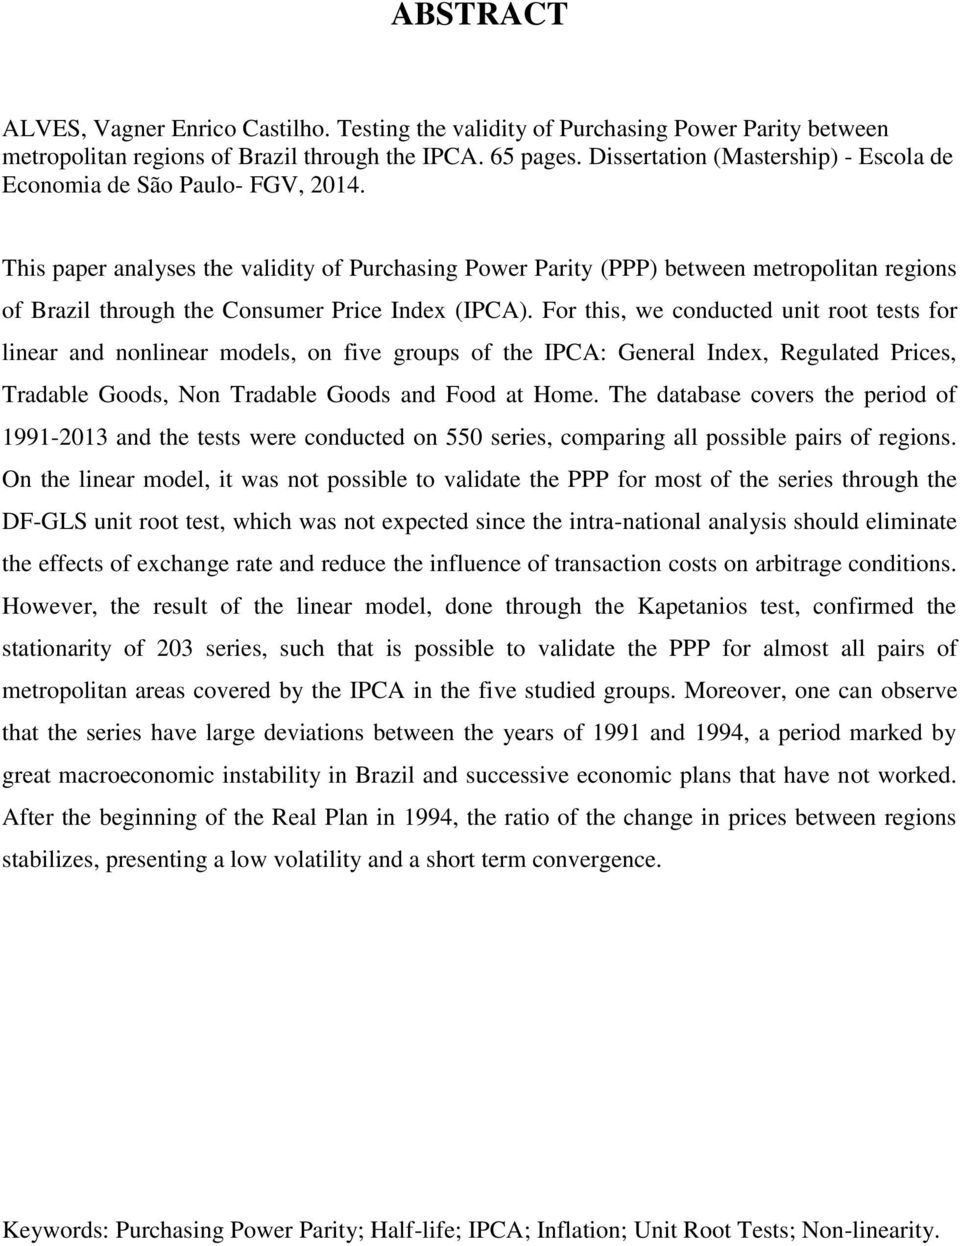 This paper analyses the validity of Purchasing Power Parity (PPP) between metropolitan regions of Brazil through the Consumer Price Index (IPCA).